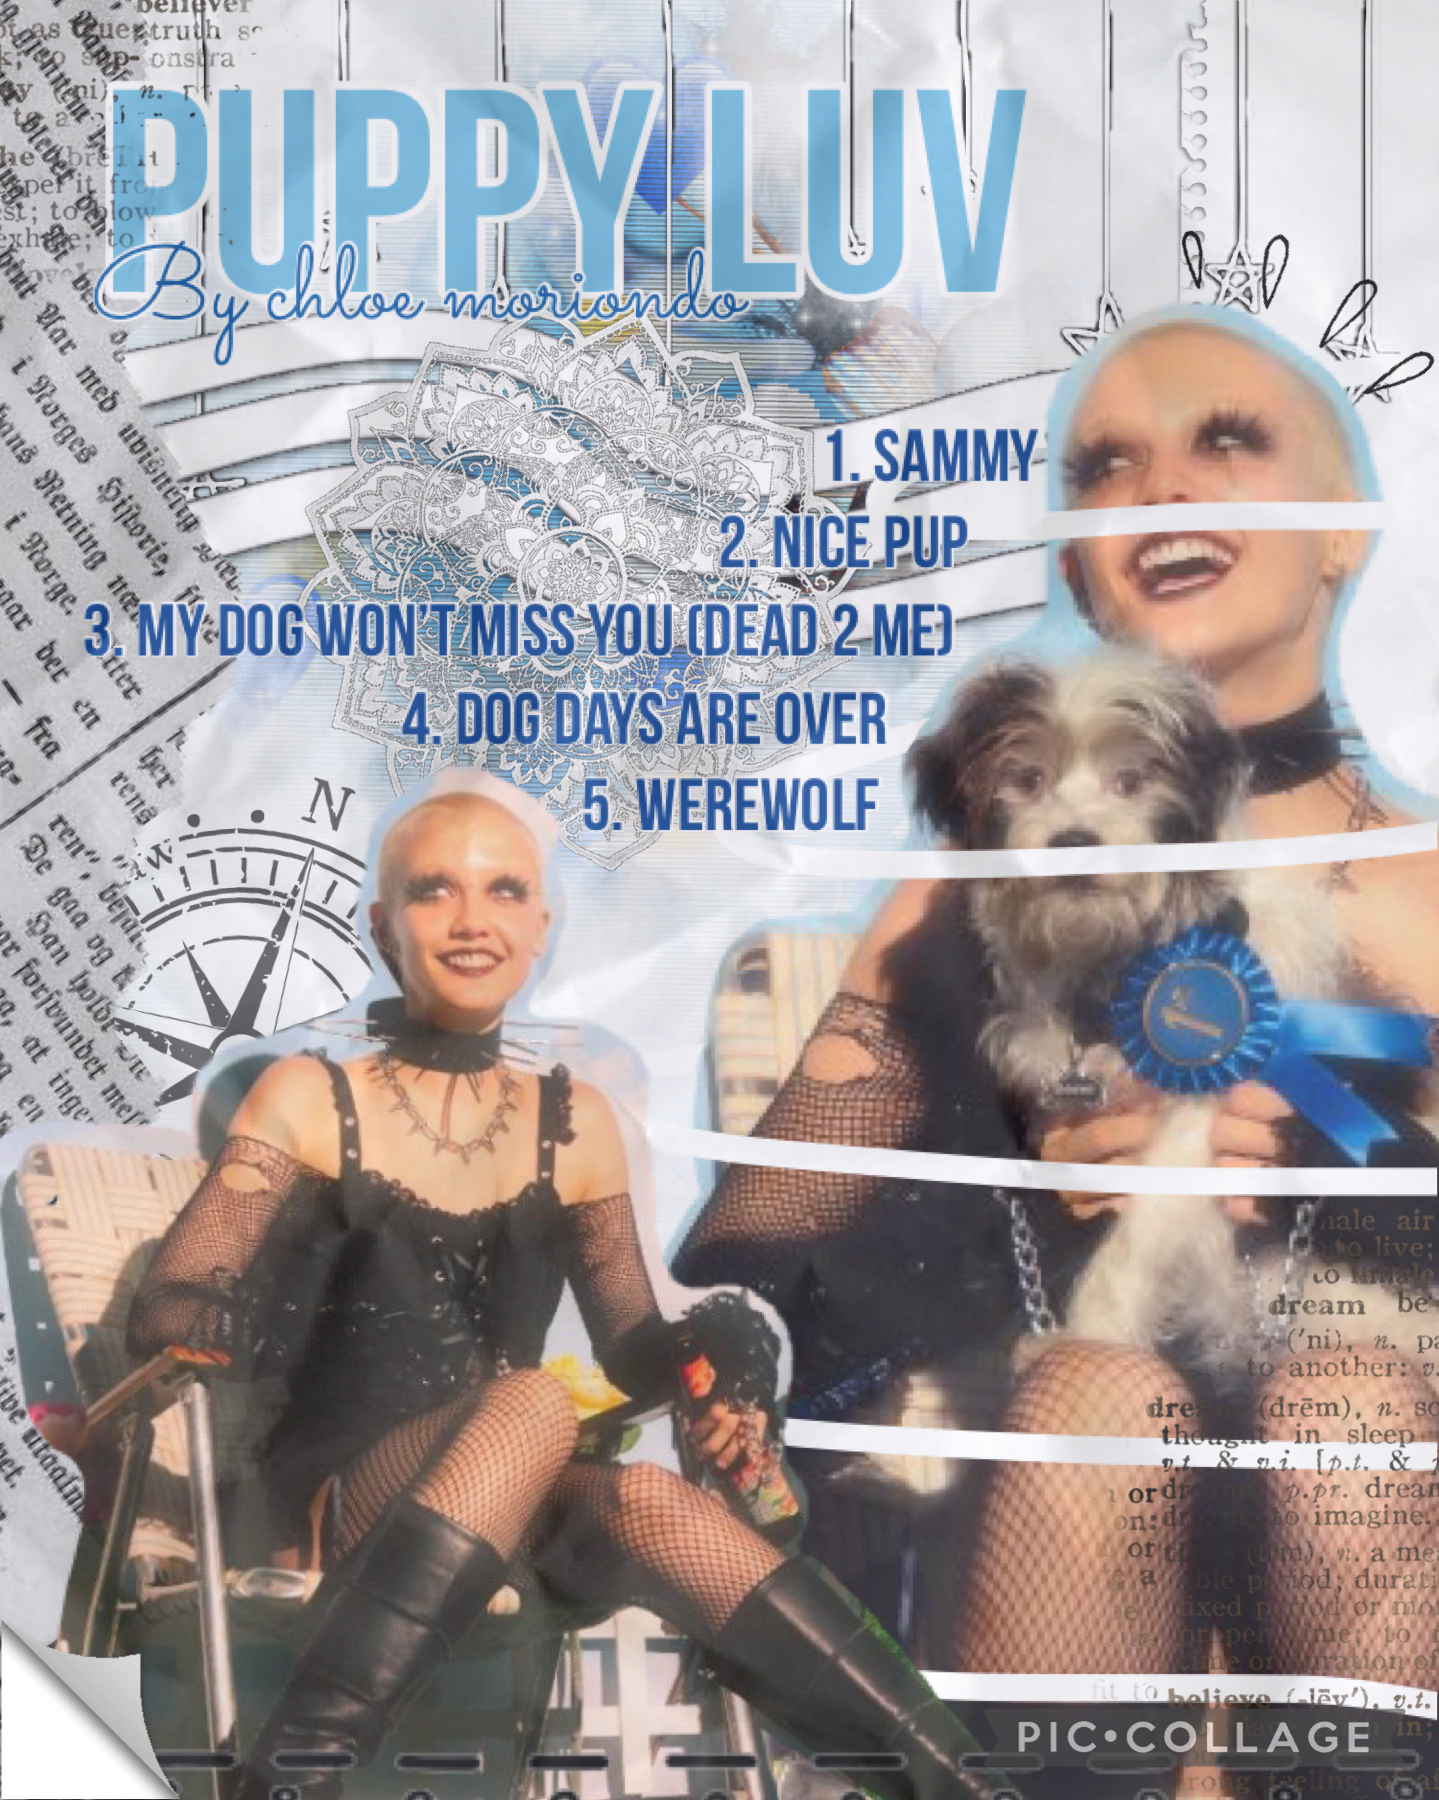 💙 TAP 💙
💙 chloe moriondo collage! 💙
💙 for her NEW album ‘puppy luv’ 💙
💙 and obviously u know ima make collages for some of the songs in this collage! 💙
💙 i feel dead rn 💙
💙 QOTD- favourite album? 💙
💙 AOTD- Sprit Orb by chloe moriondo 💙